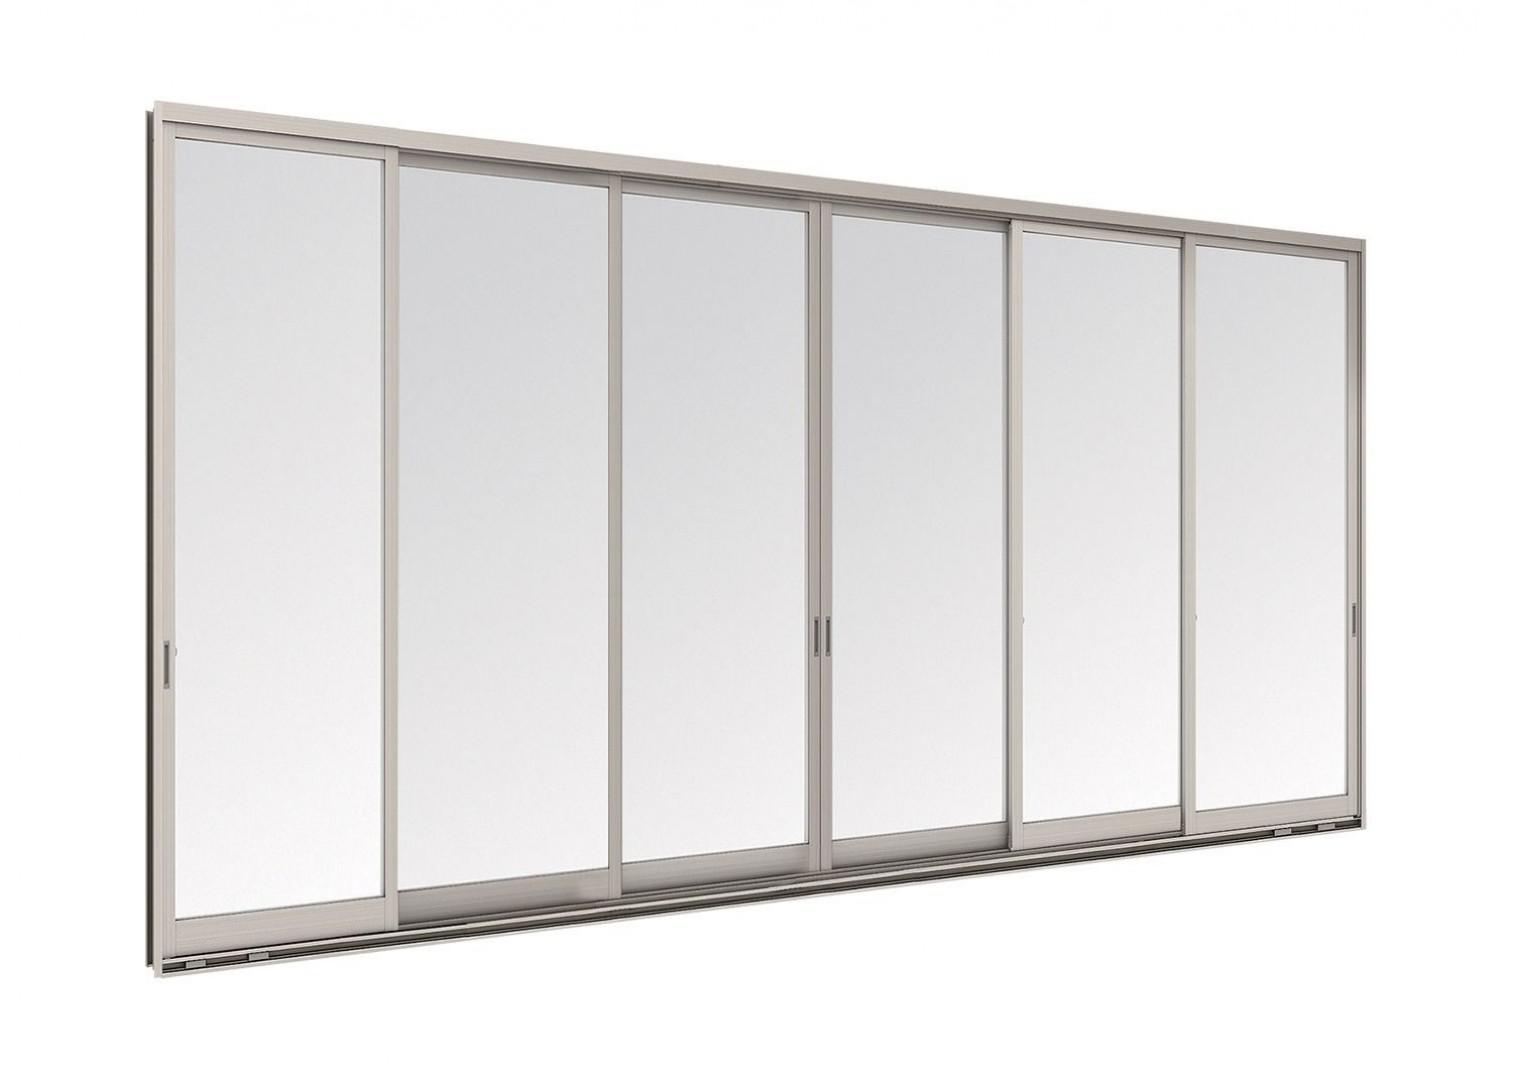 VIEW AND VIEW PLUS - Sliding Door 6 Panels on 3 Tracks from TOSTEM